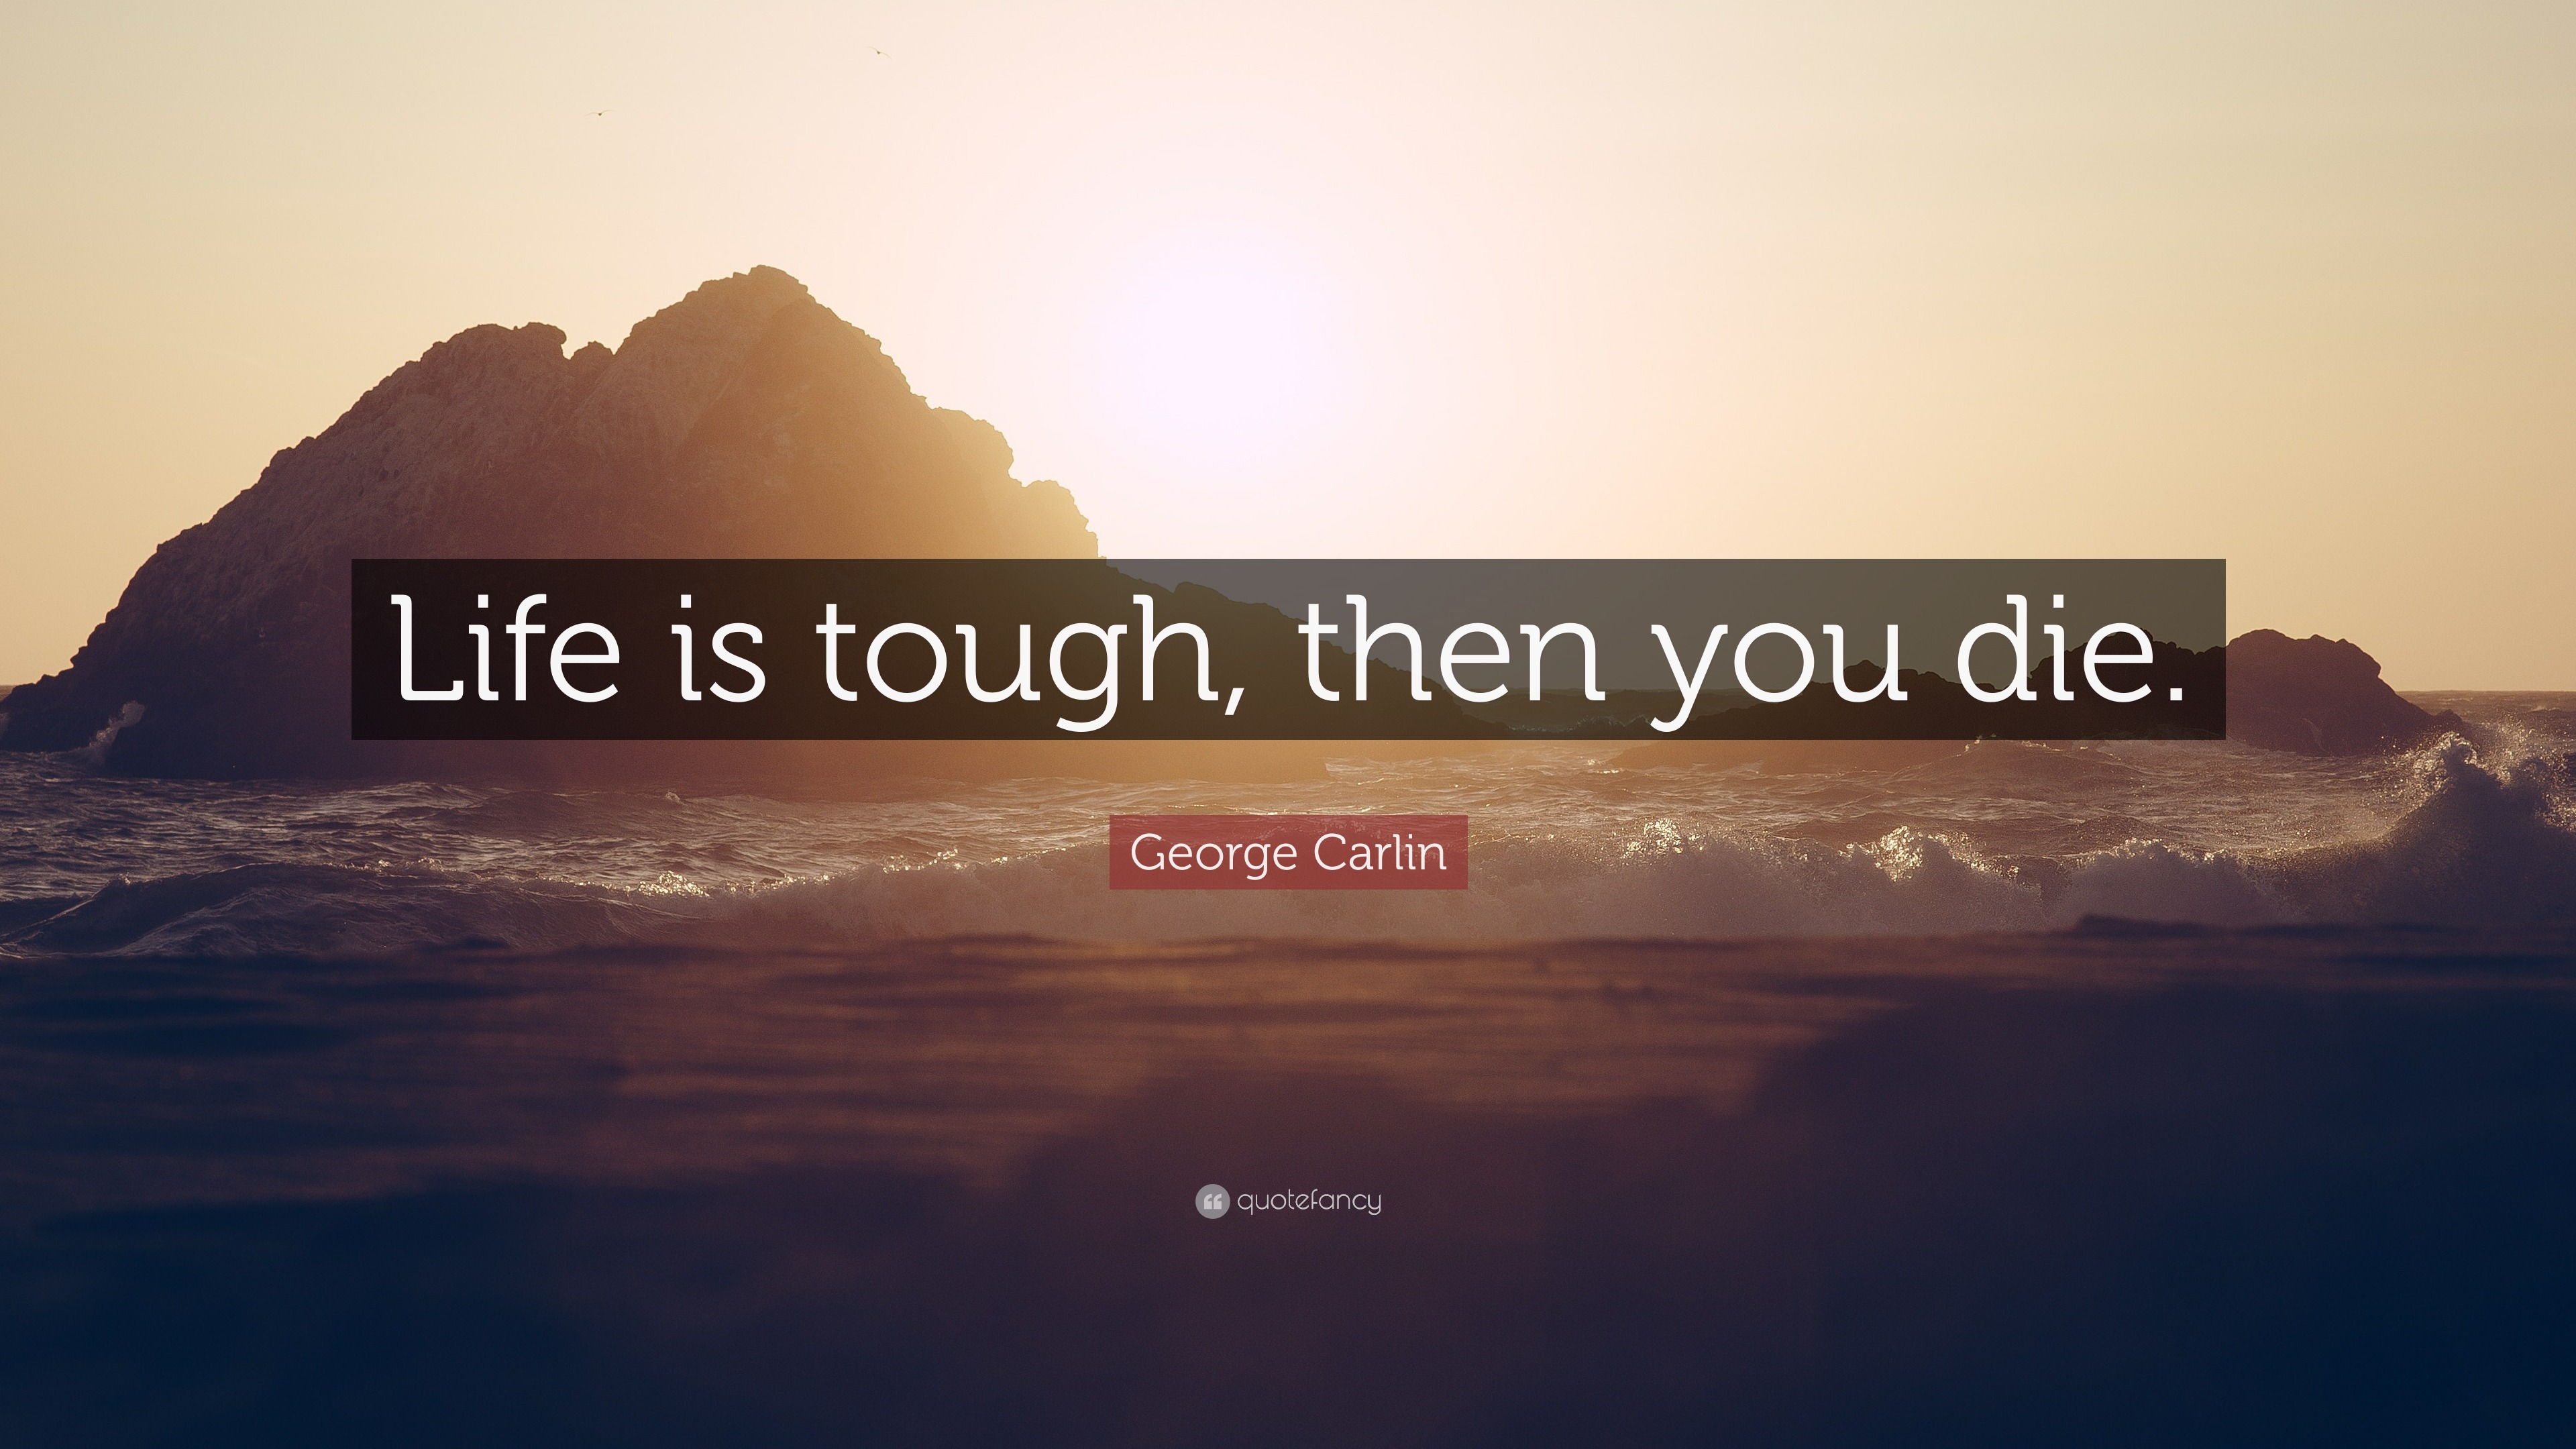 George Carlin Quote “Life is tough then you ”